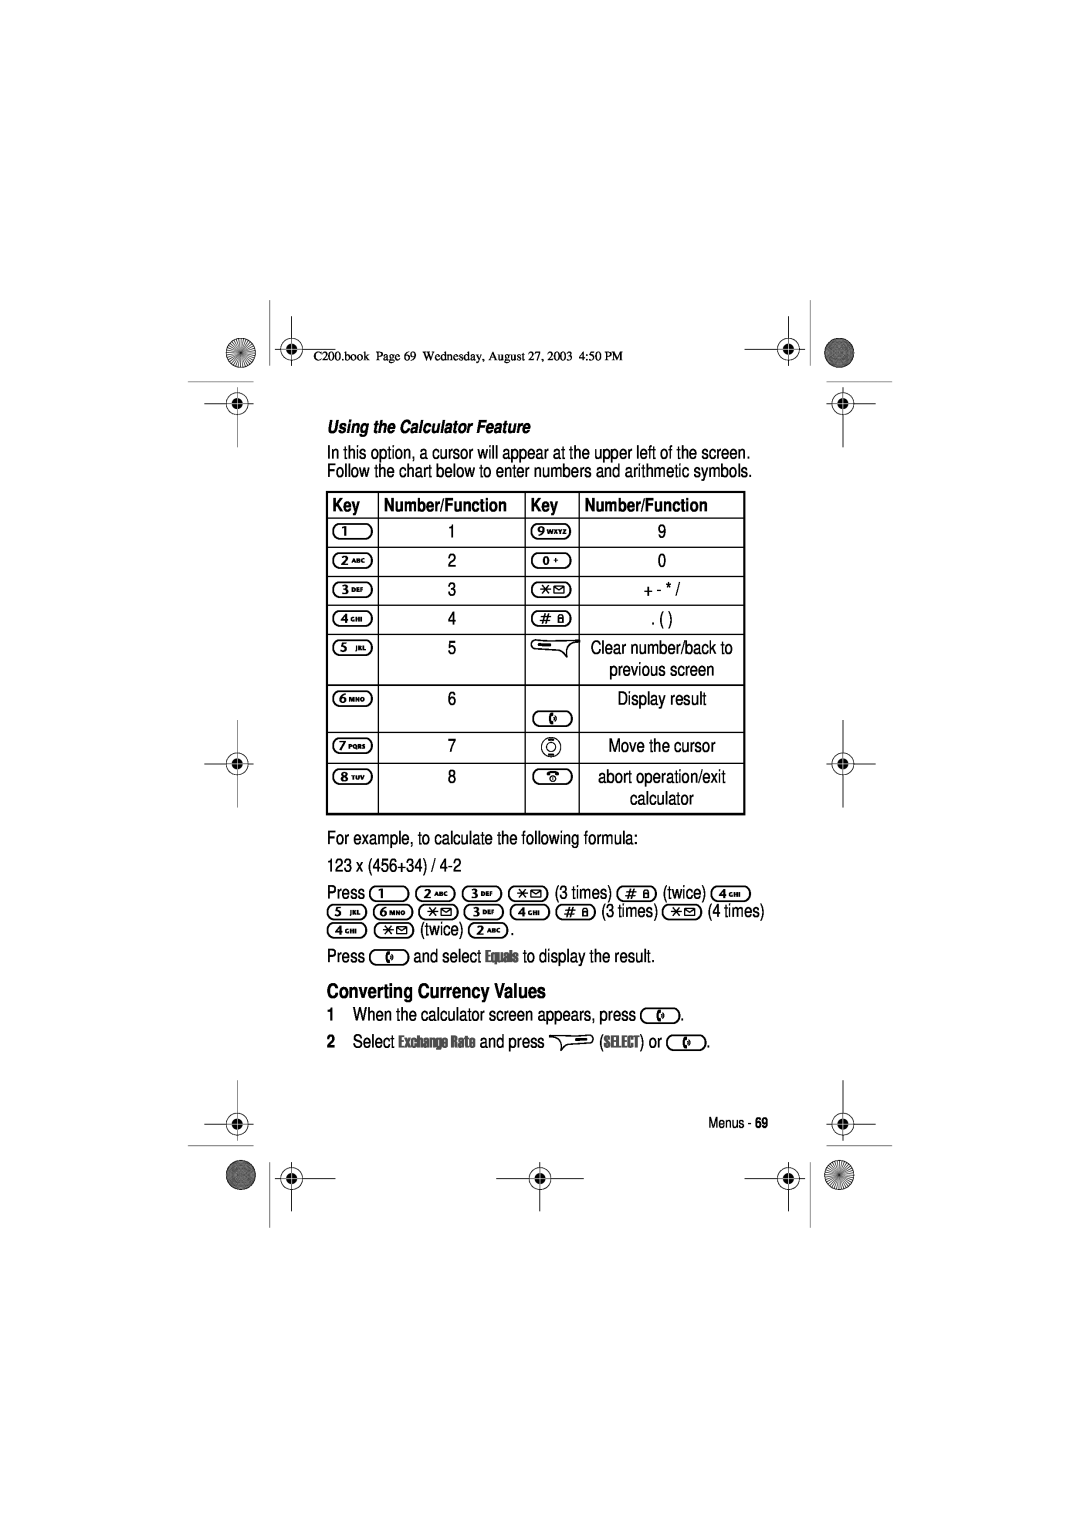 Motorola C200 manual Converting Currency Values, Using the Calculator Feature, Number/Function 